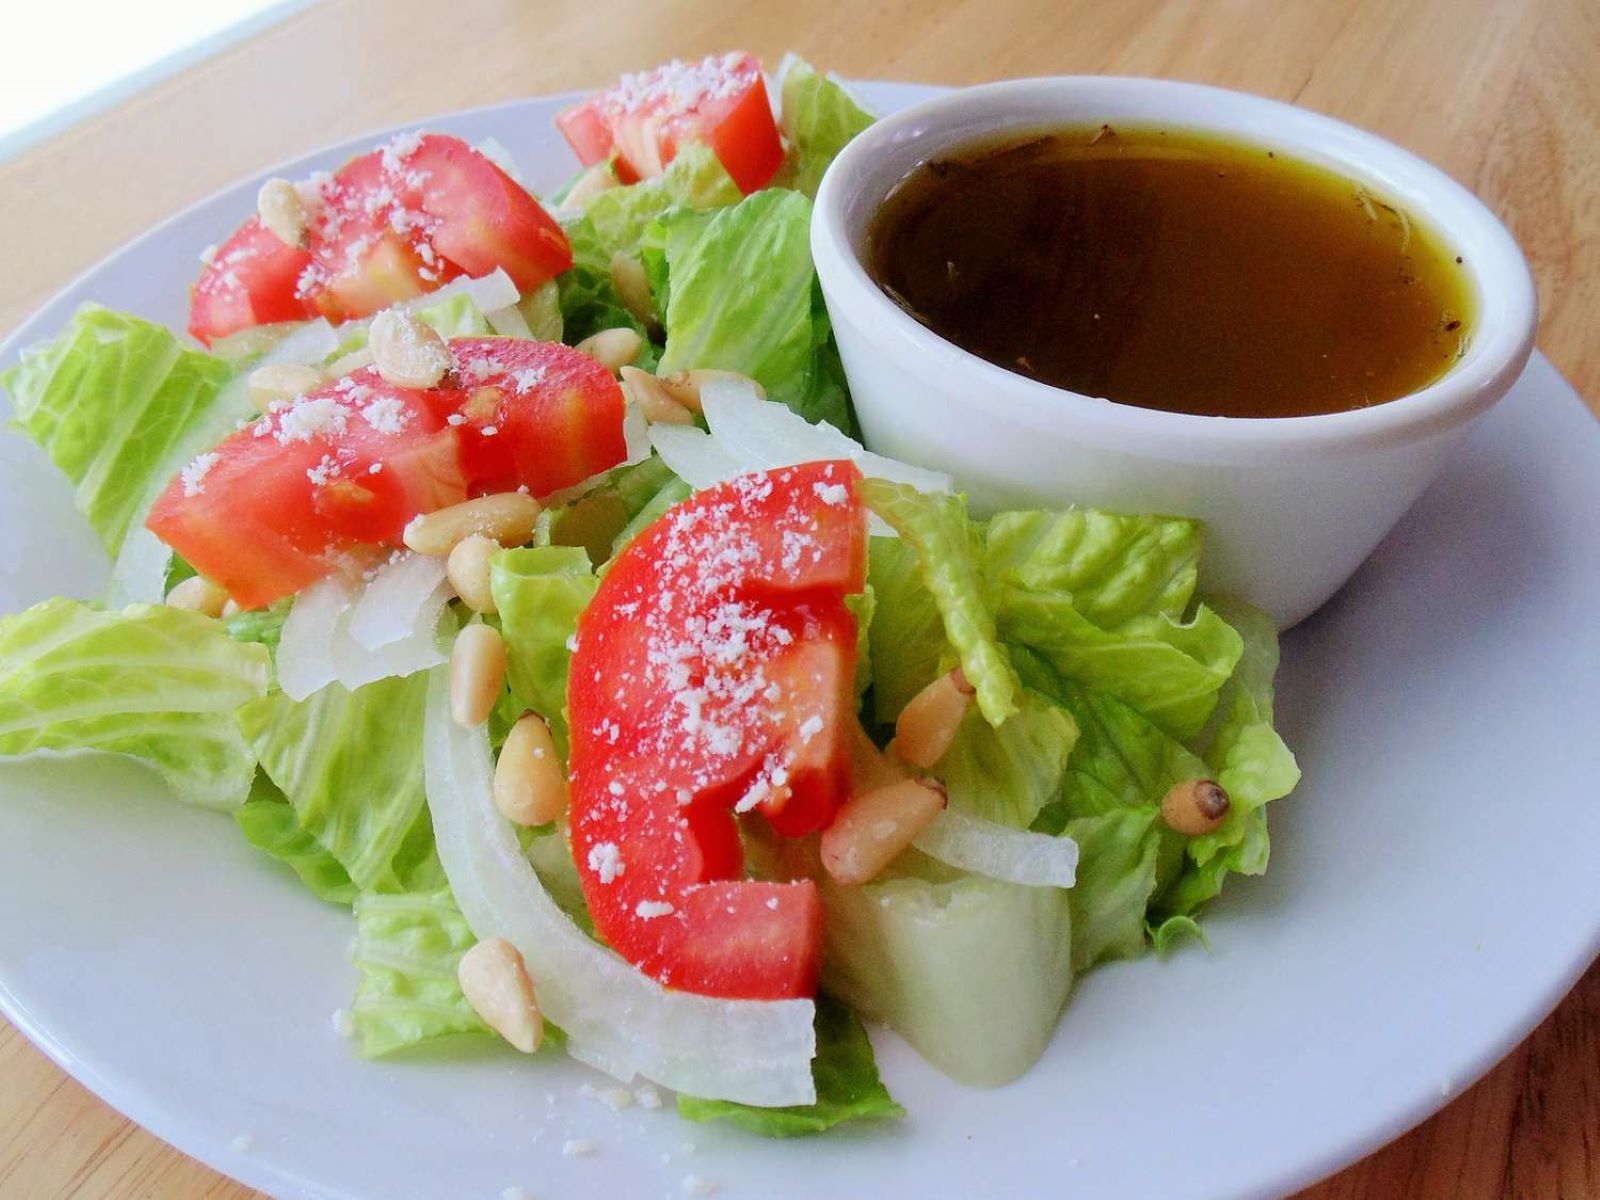 How To Store Salad With Dressing